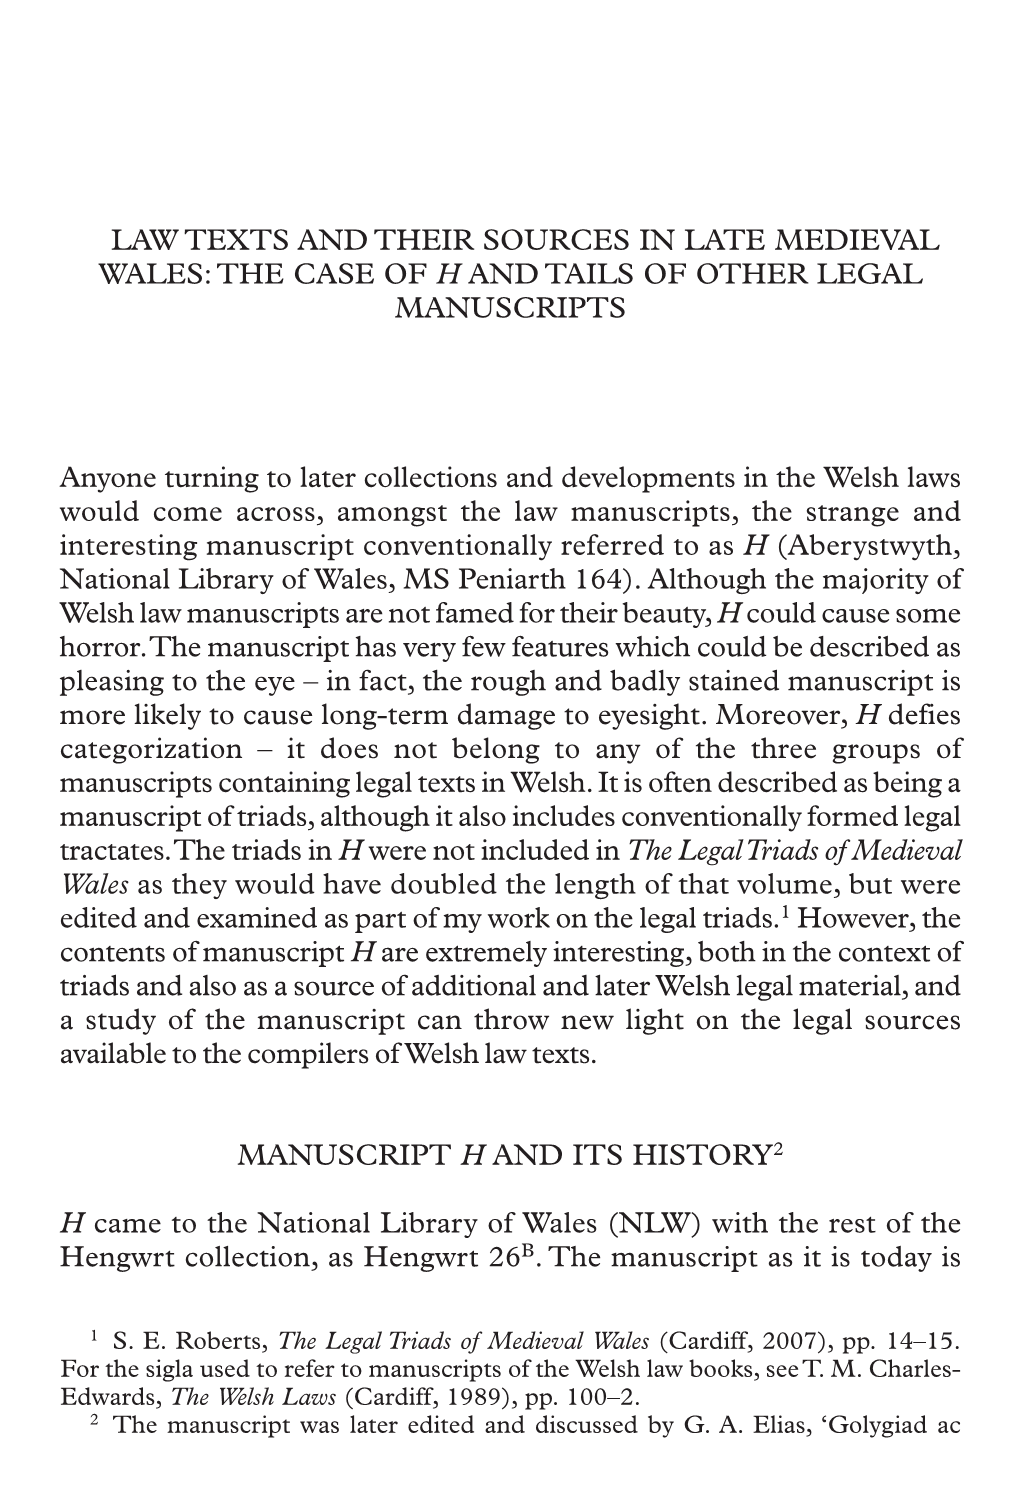 Law Texts and Their Sources in Late Medieval Wales: the Case of H and Tails of Other Legal Manuscripts